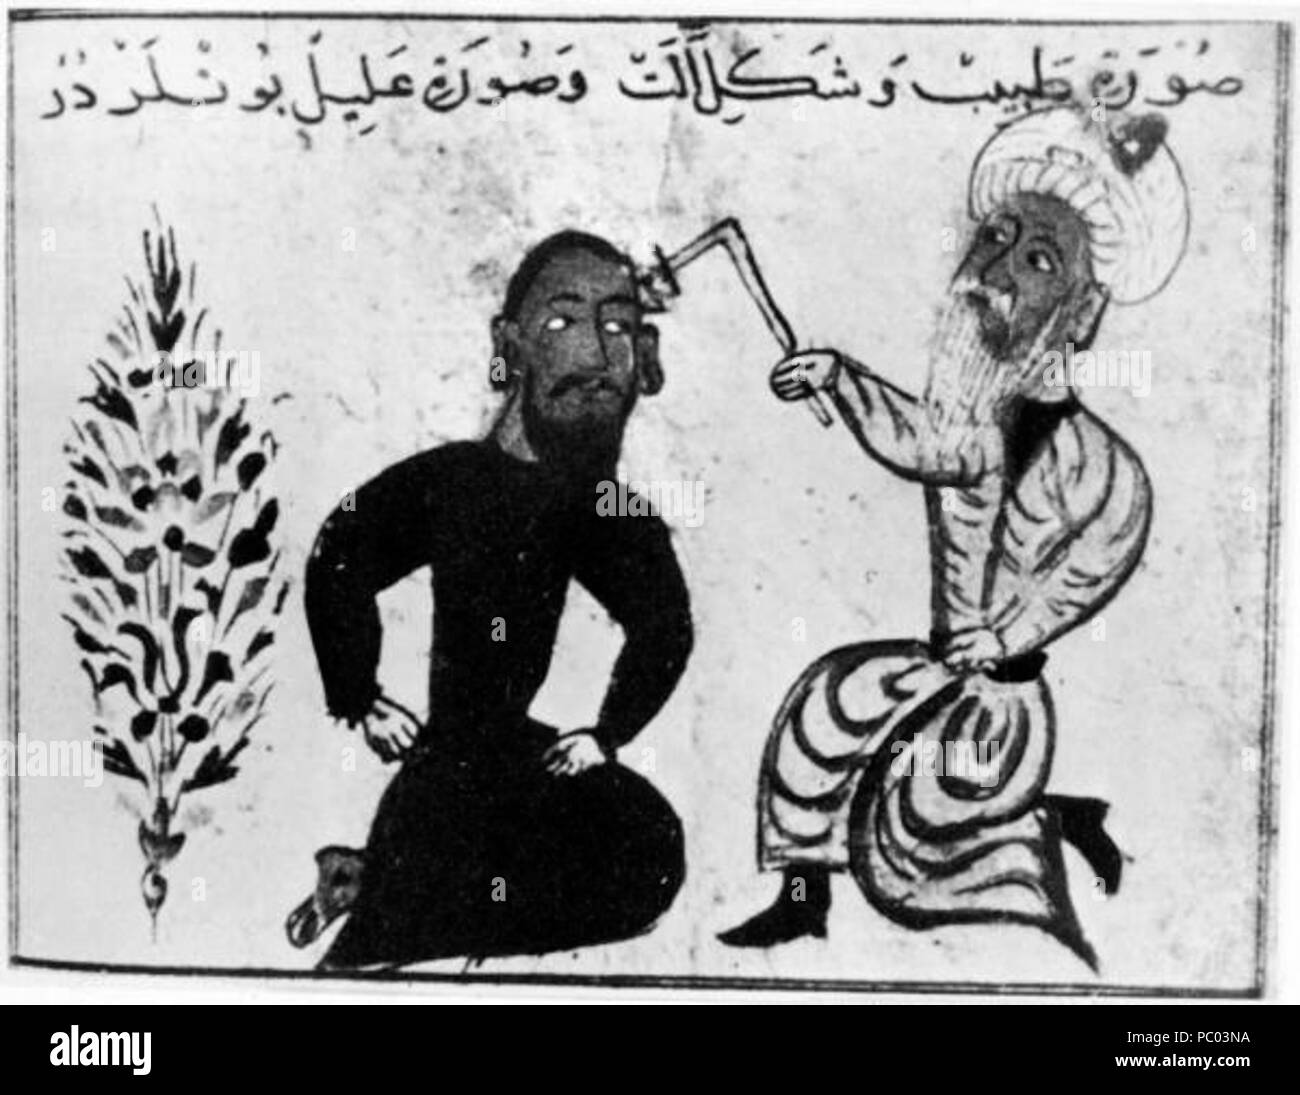 293 Illustration of medieval Arab doctor treating a patient by cauterizing a wound Stock Photo